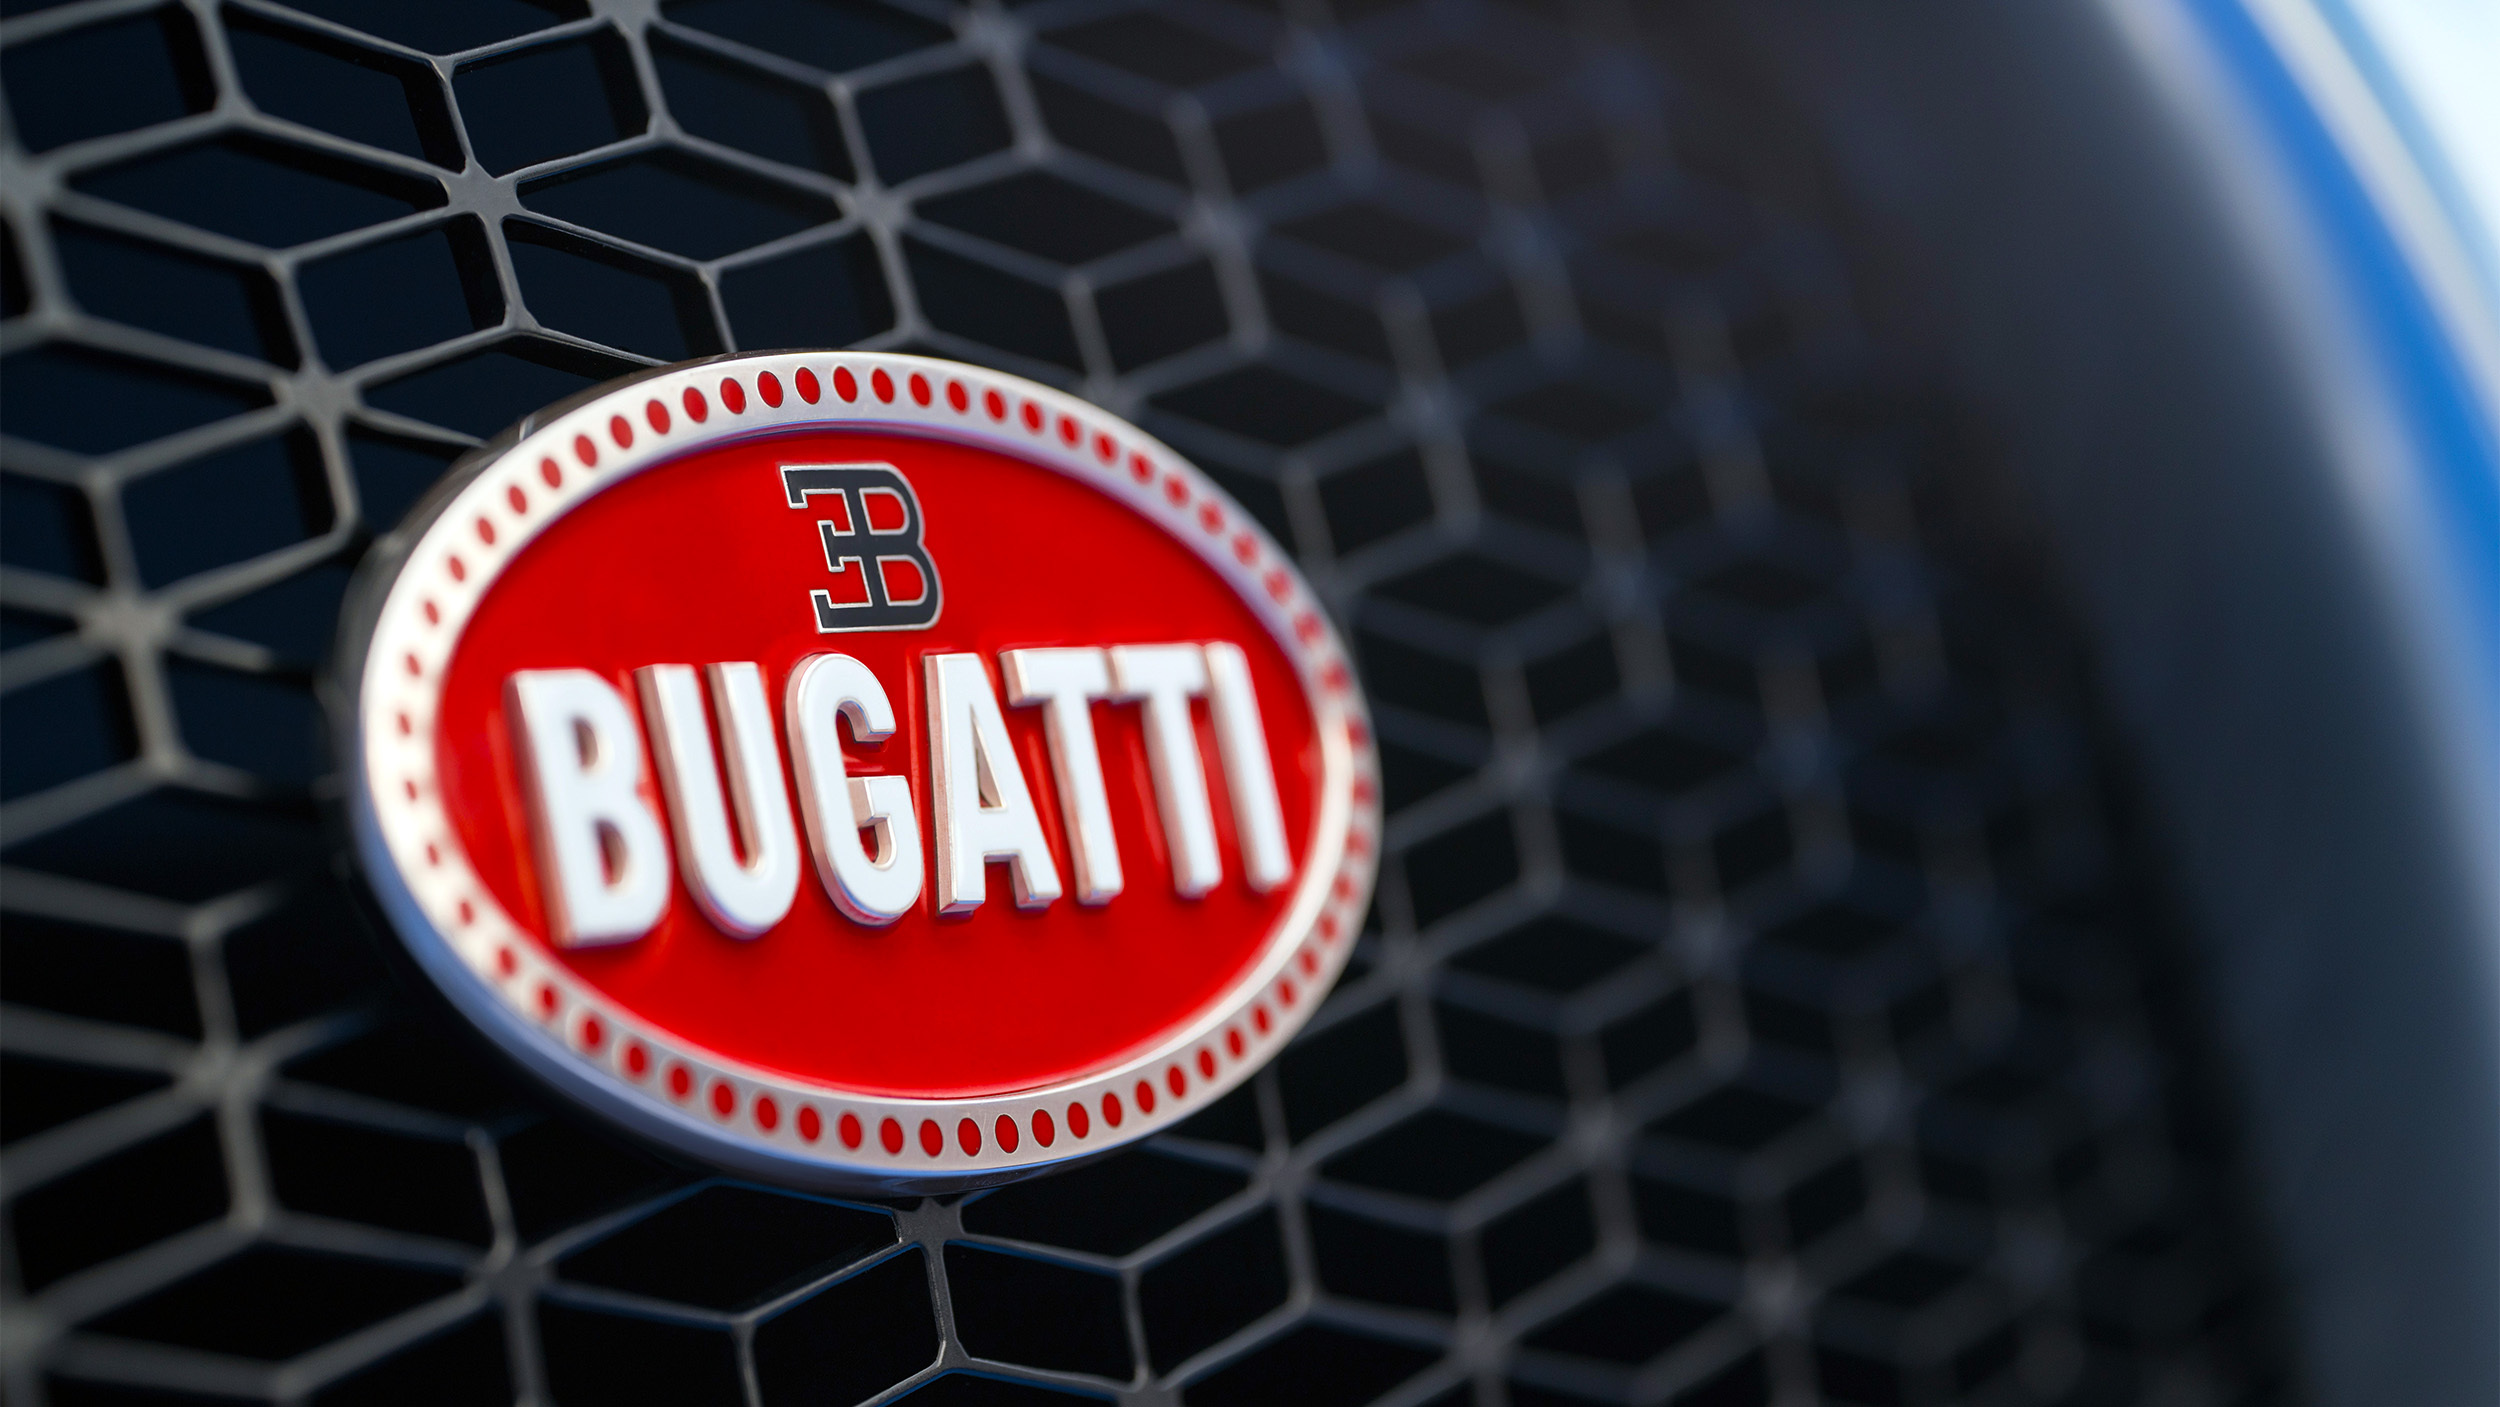 Bugatti Chirons V16 Successor Caught Out In The Open (Image Inside) [Video]